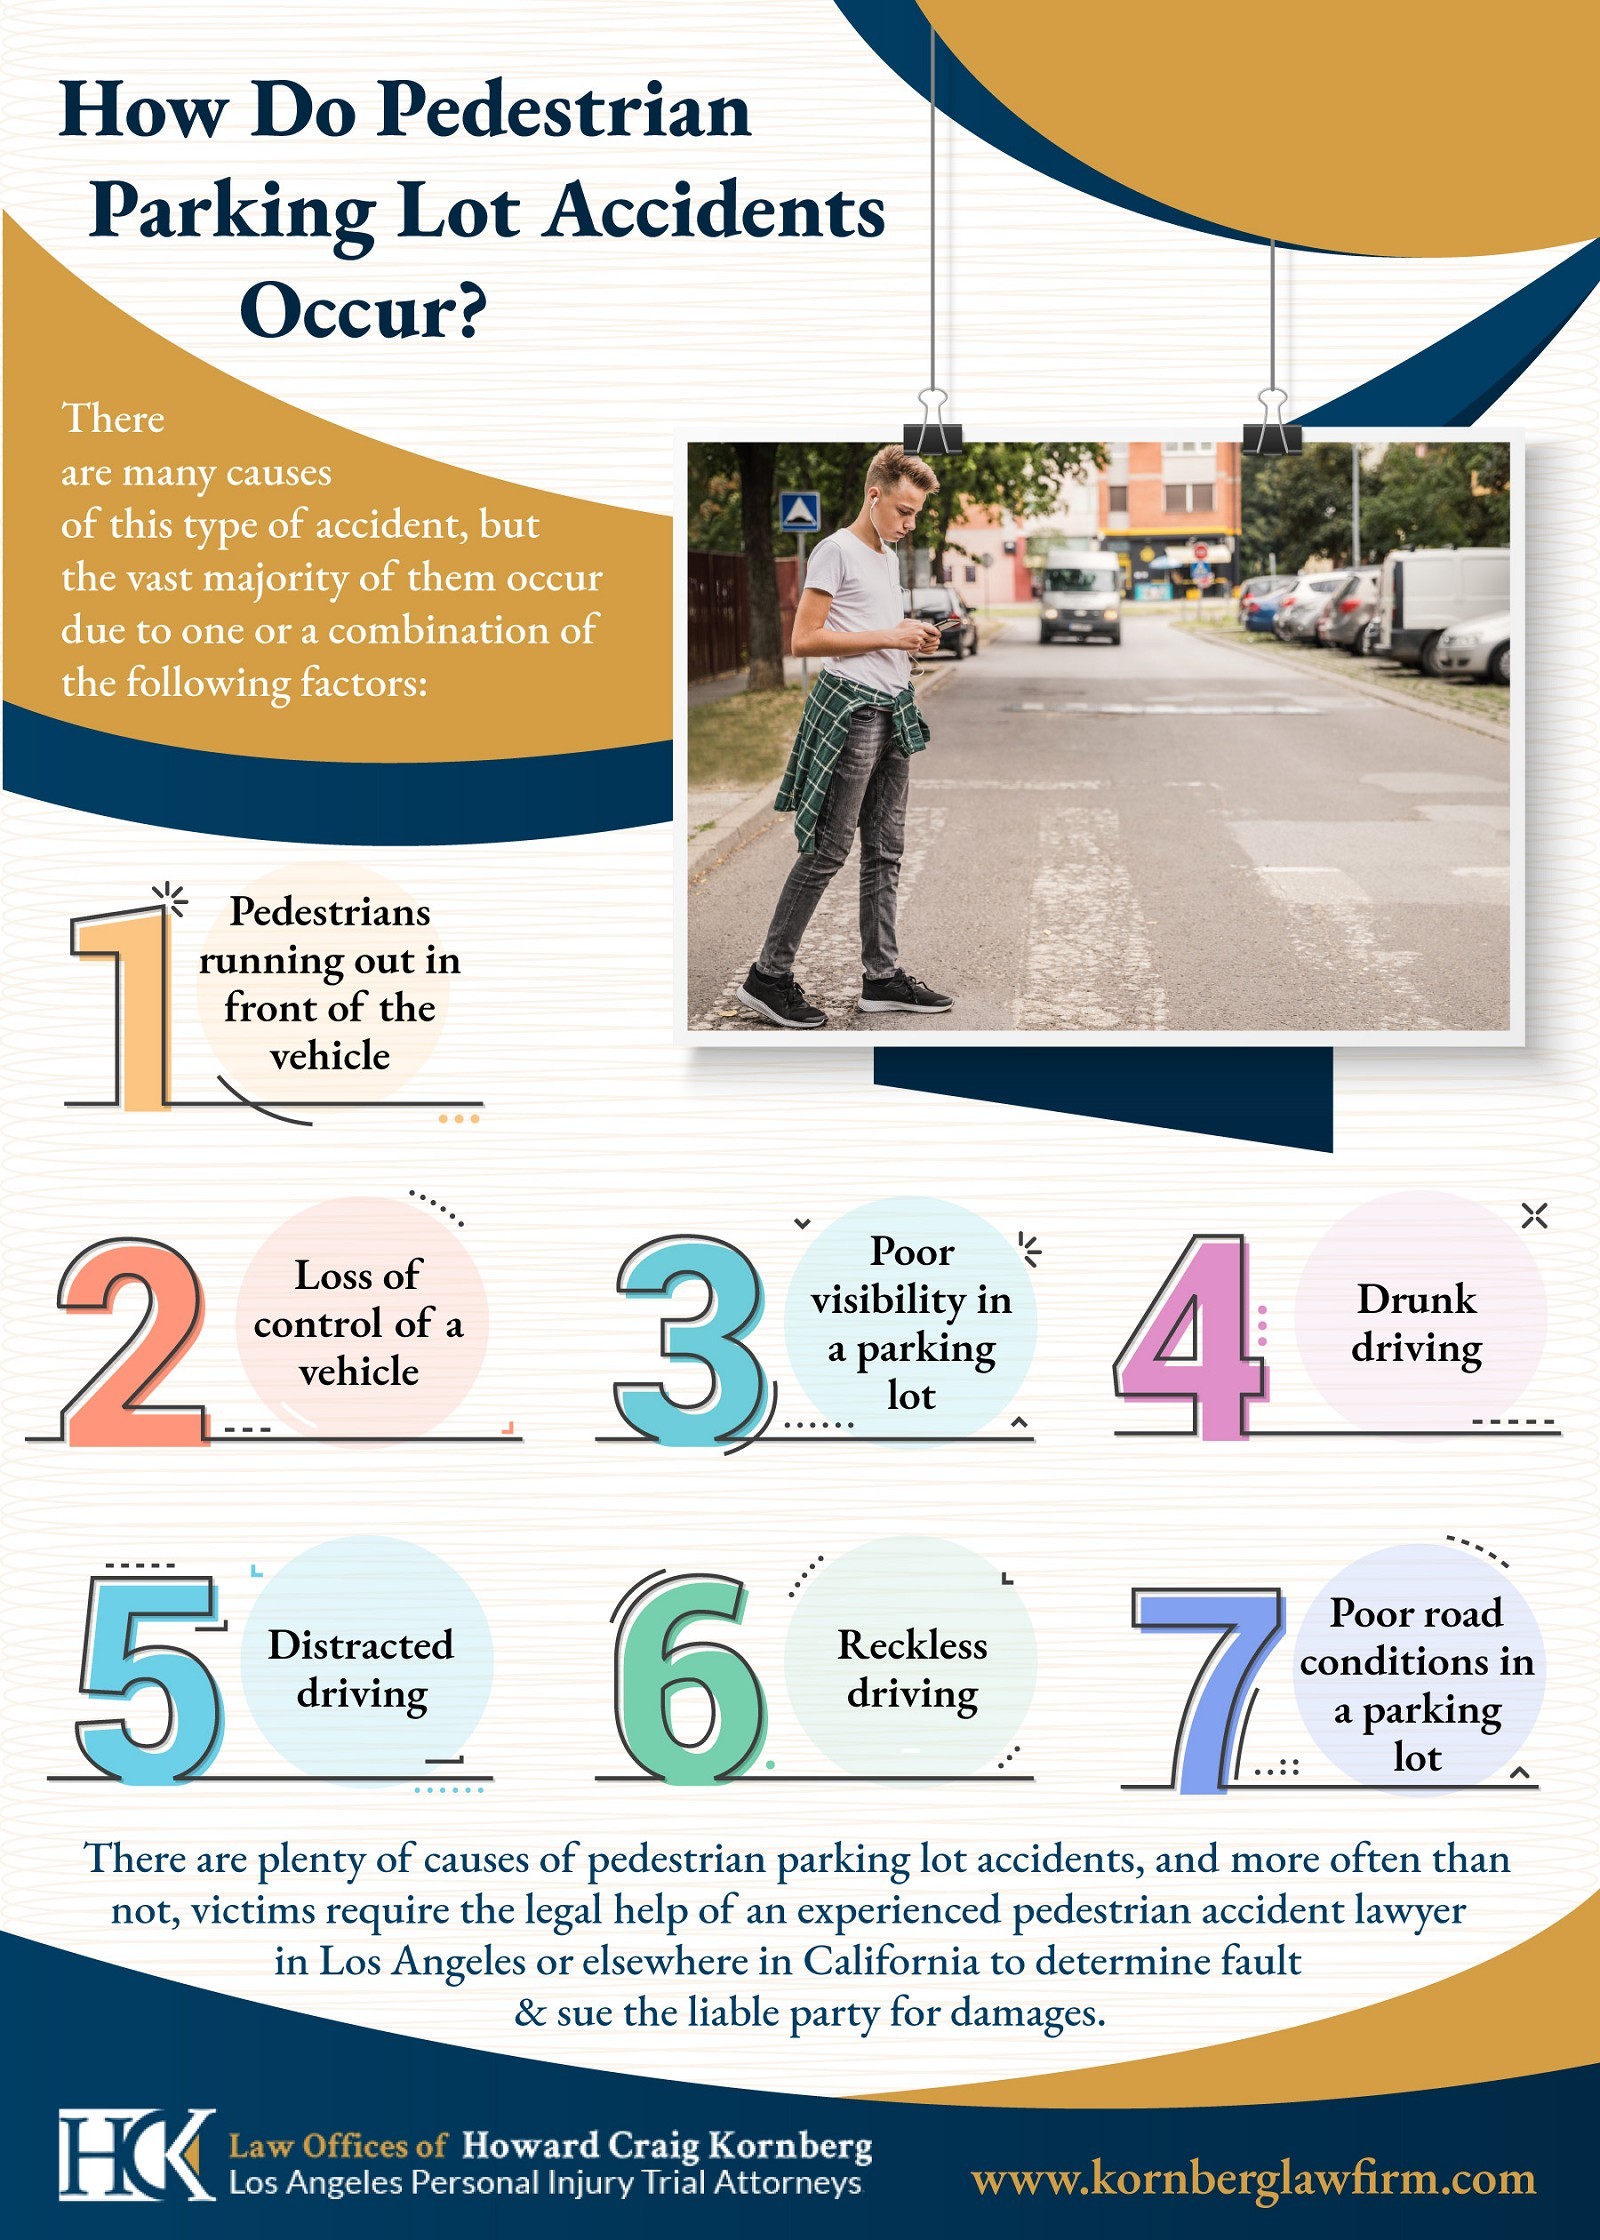 How Do Pedestrian Parking Lot Accidents Occur?